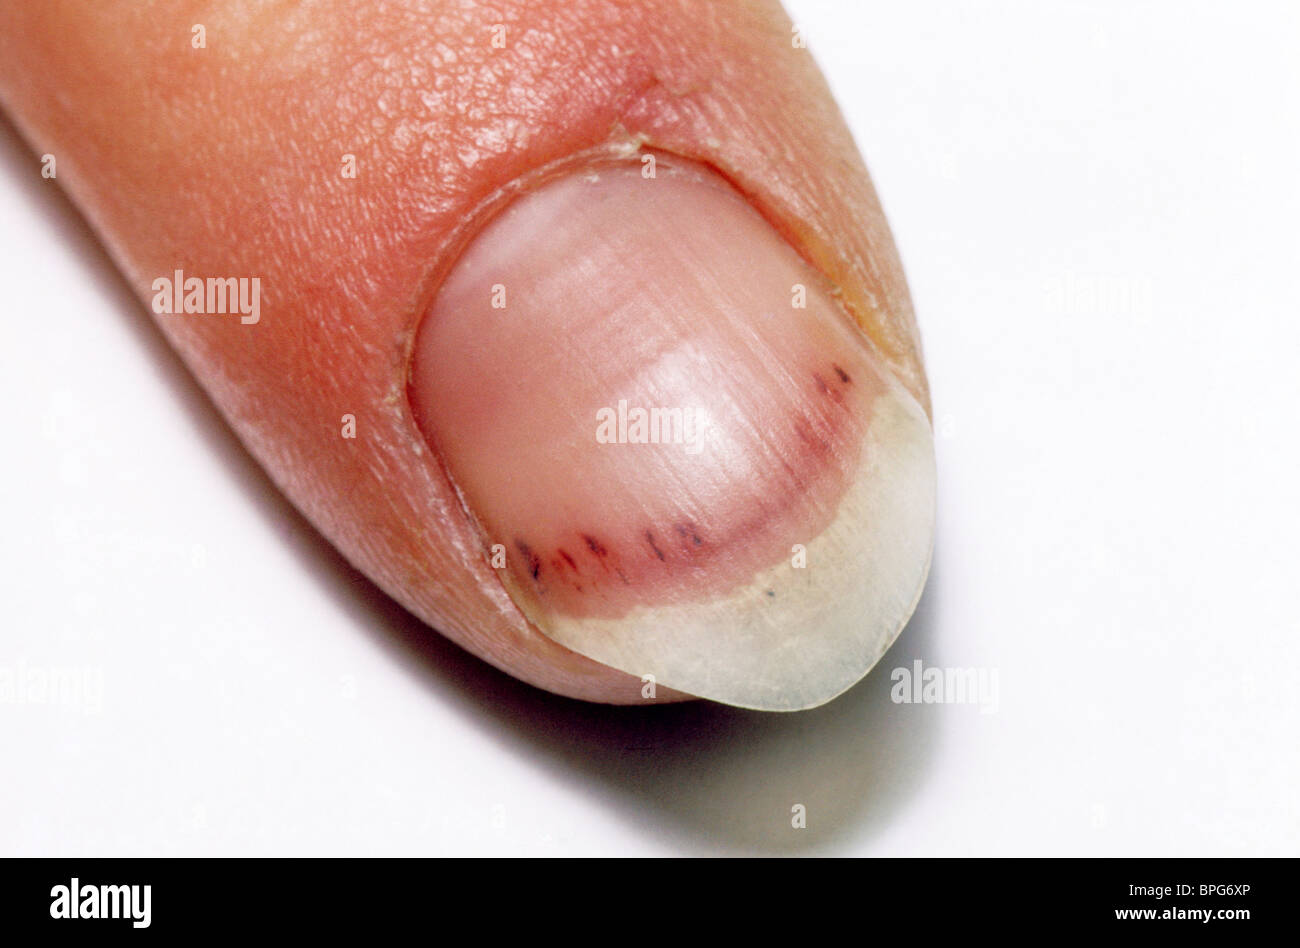 What causes black lines in nails? How can you treat it? - Quora